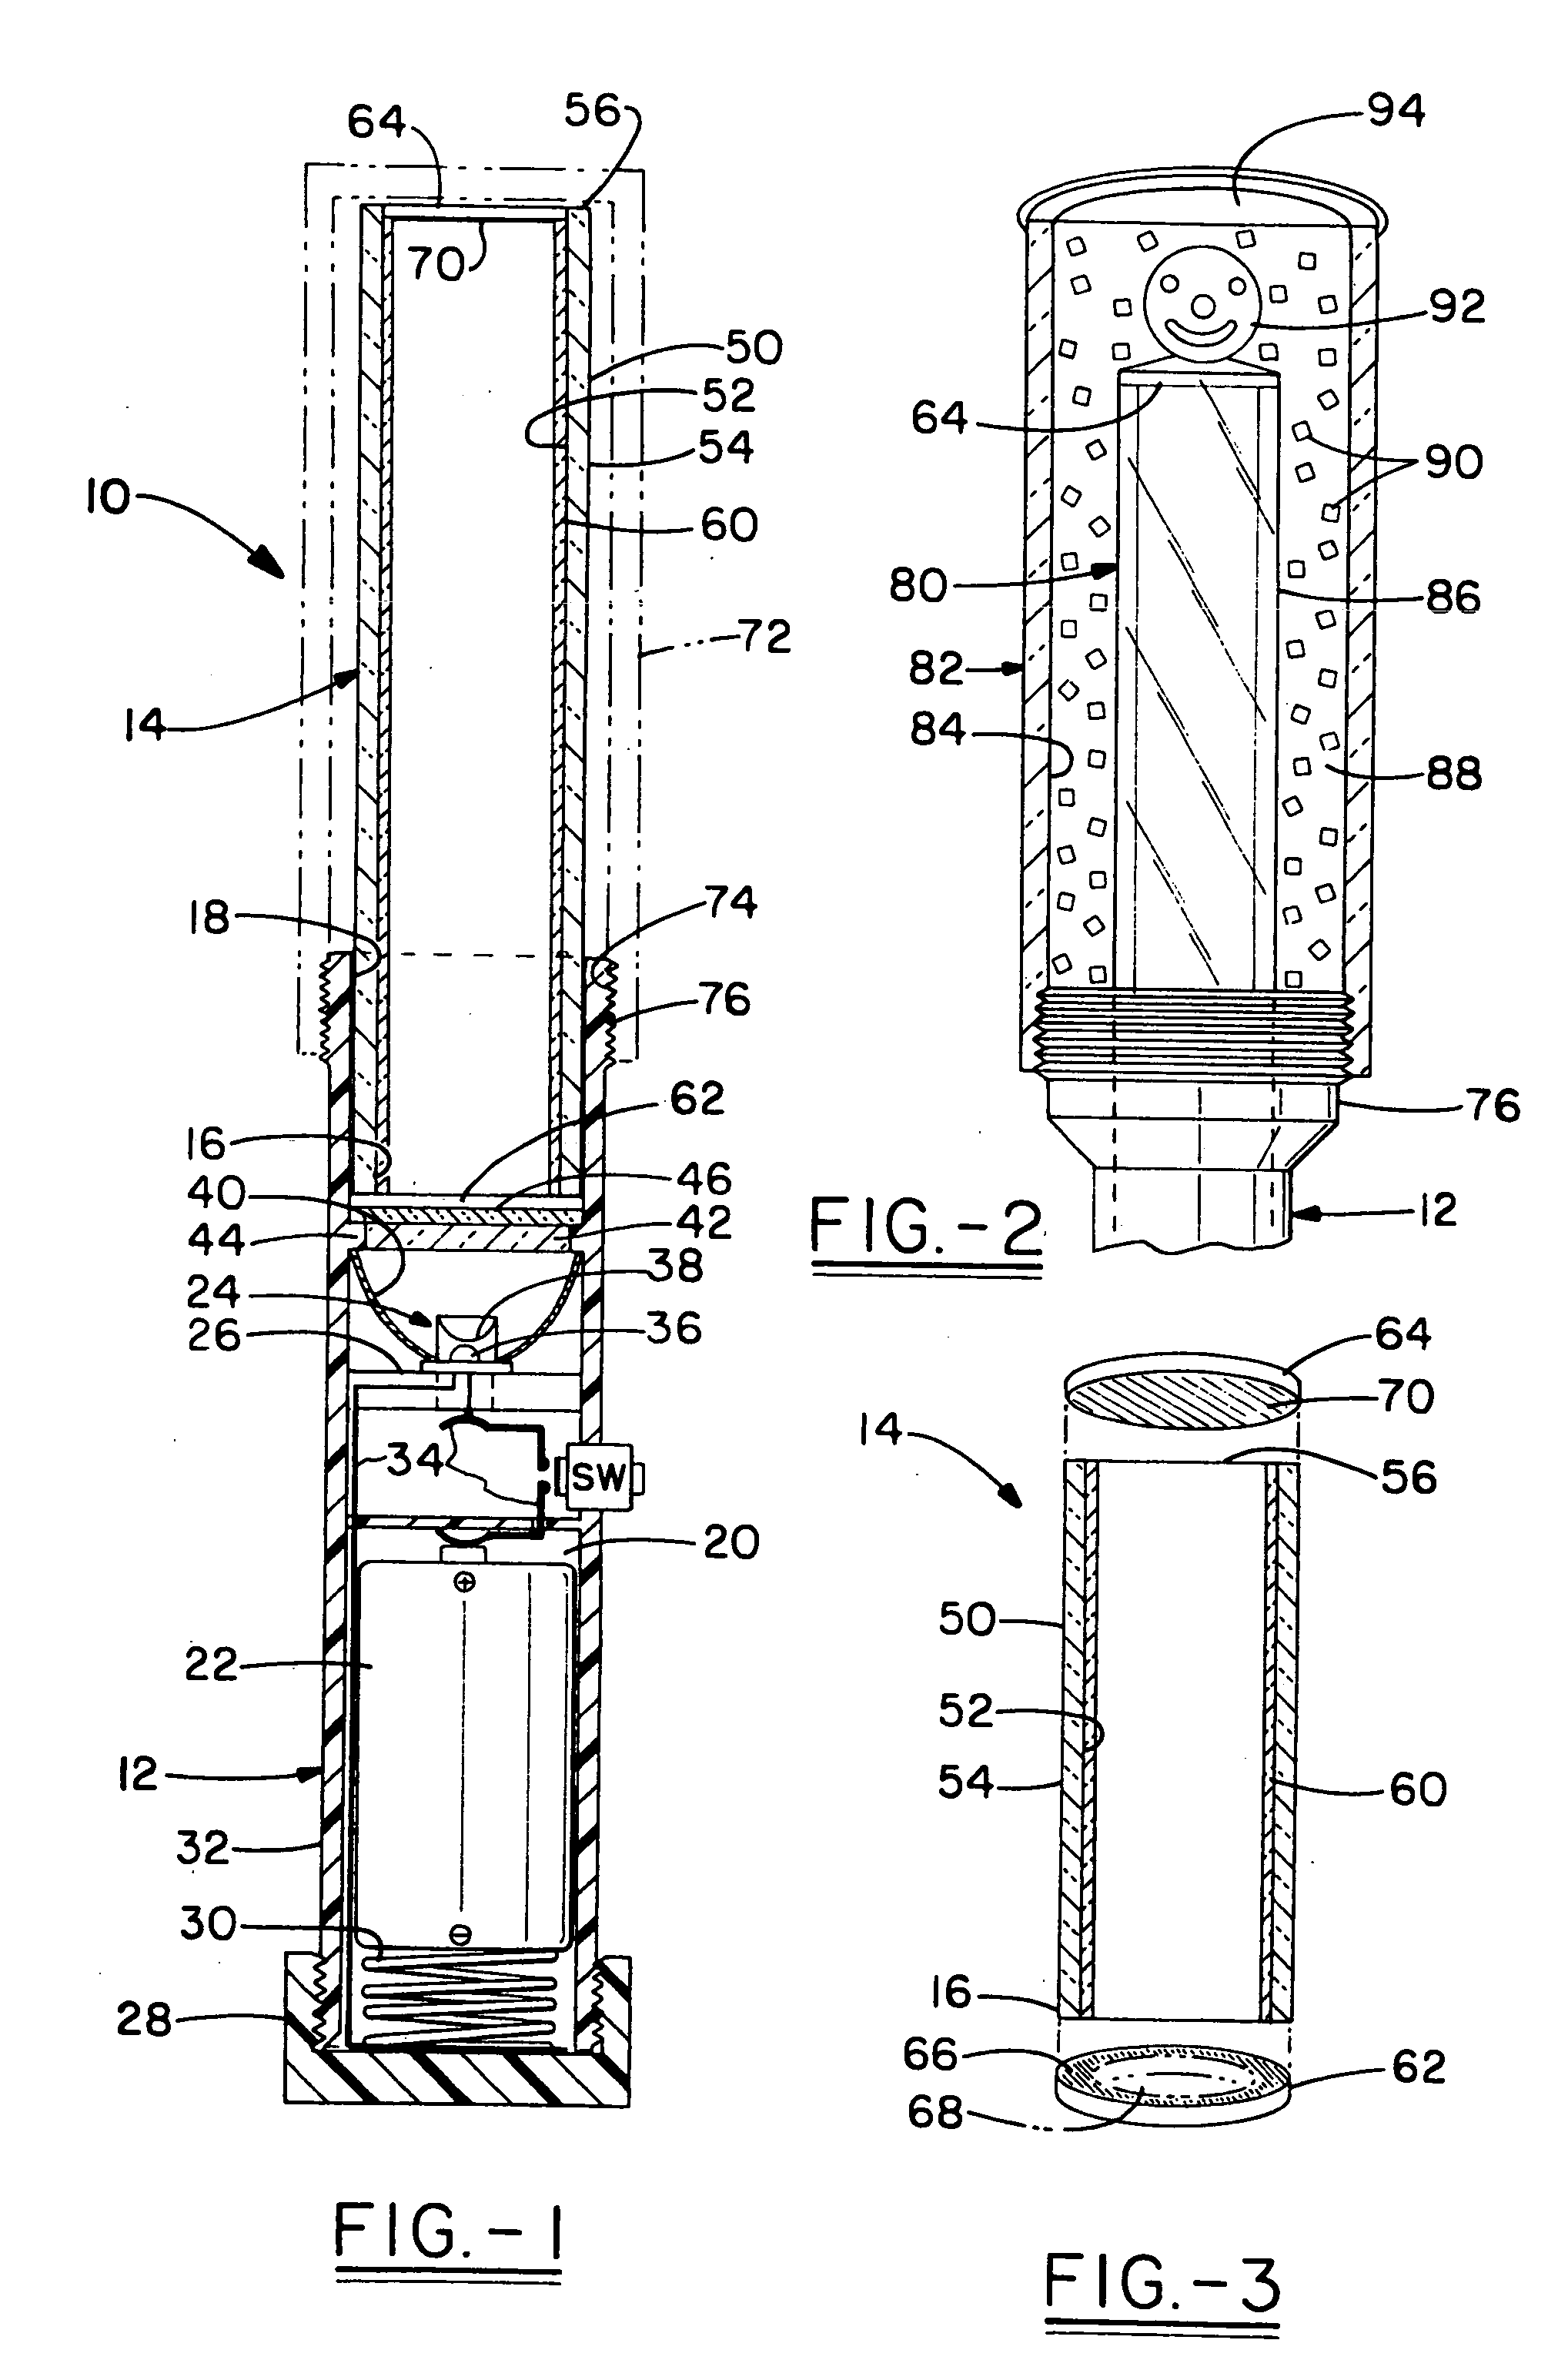 Interchangeable simulated neon light tube assemblies and related accessories for use with lighting devices